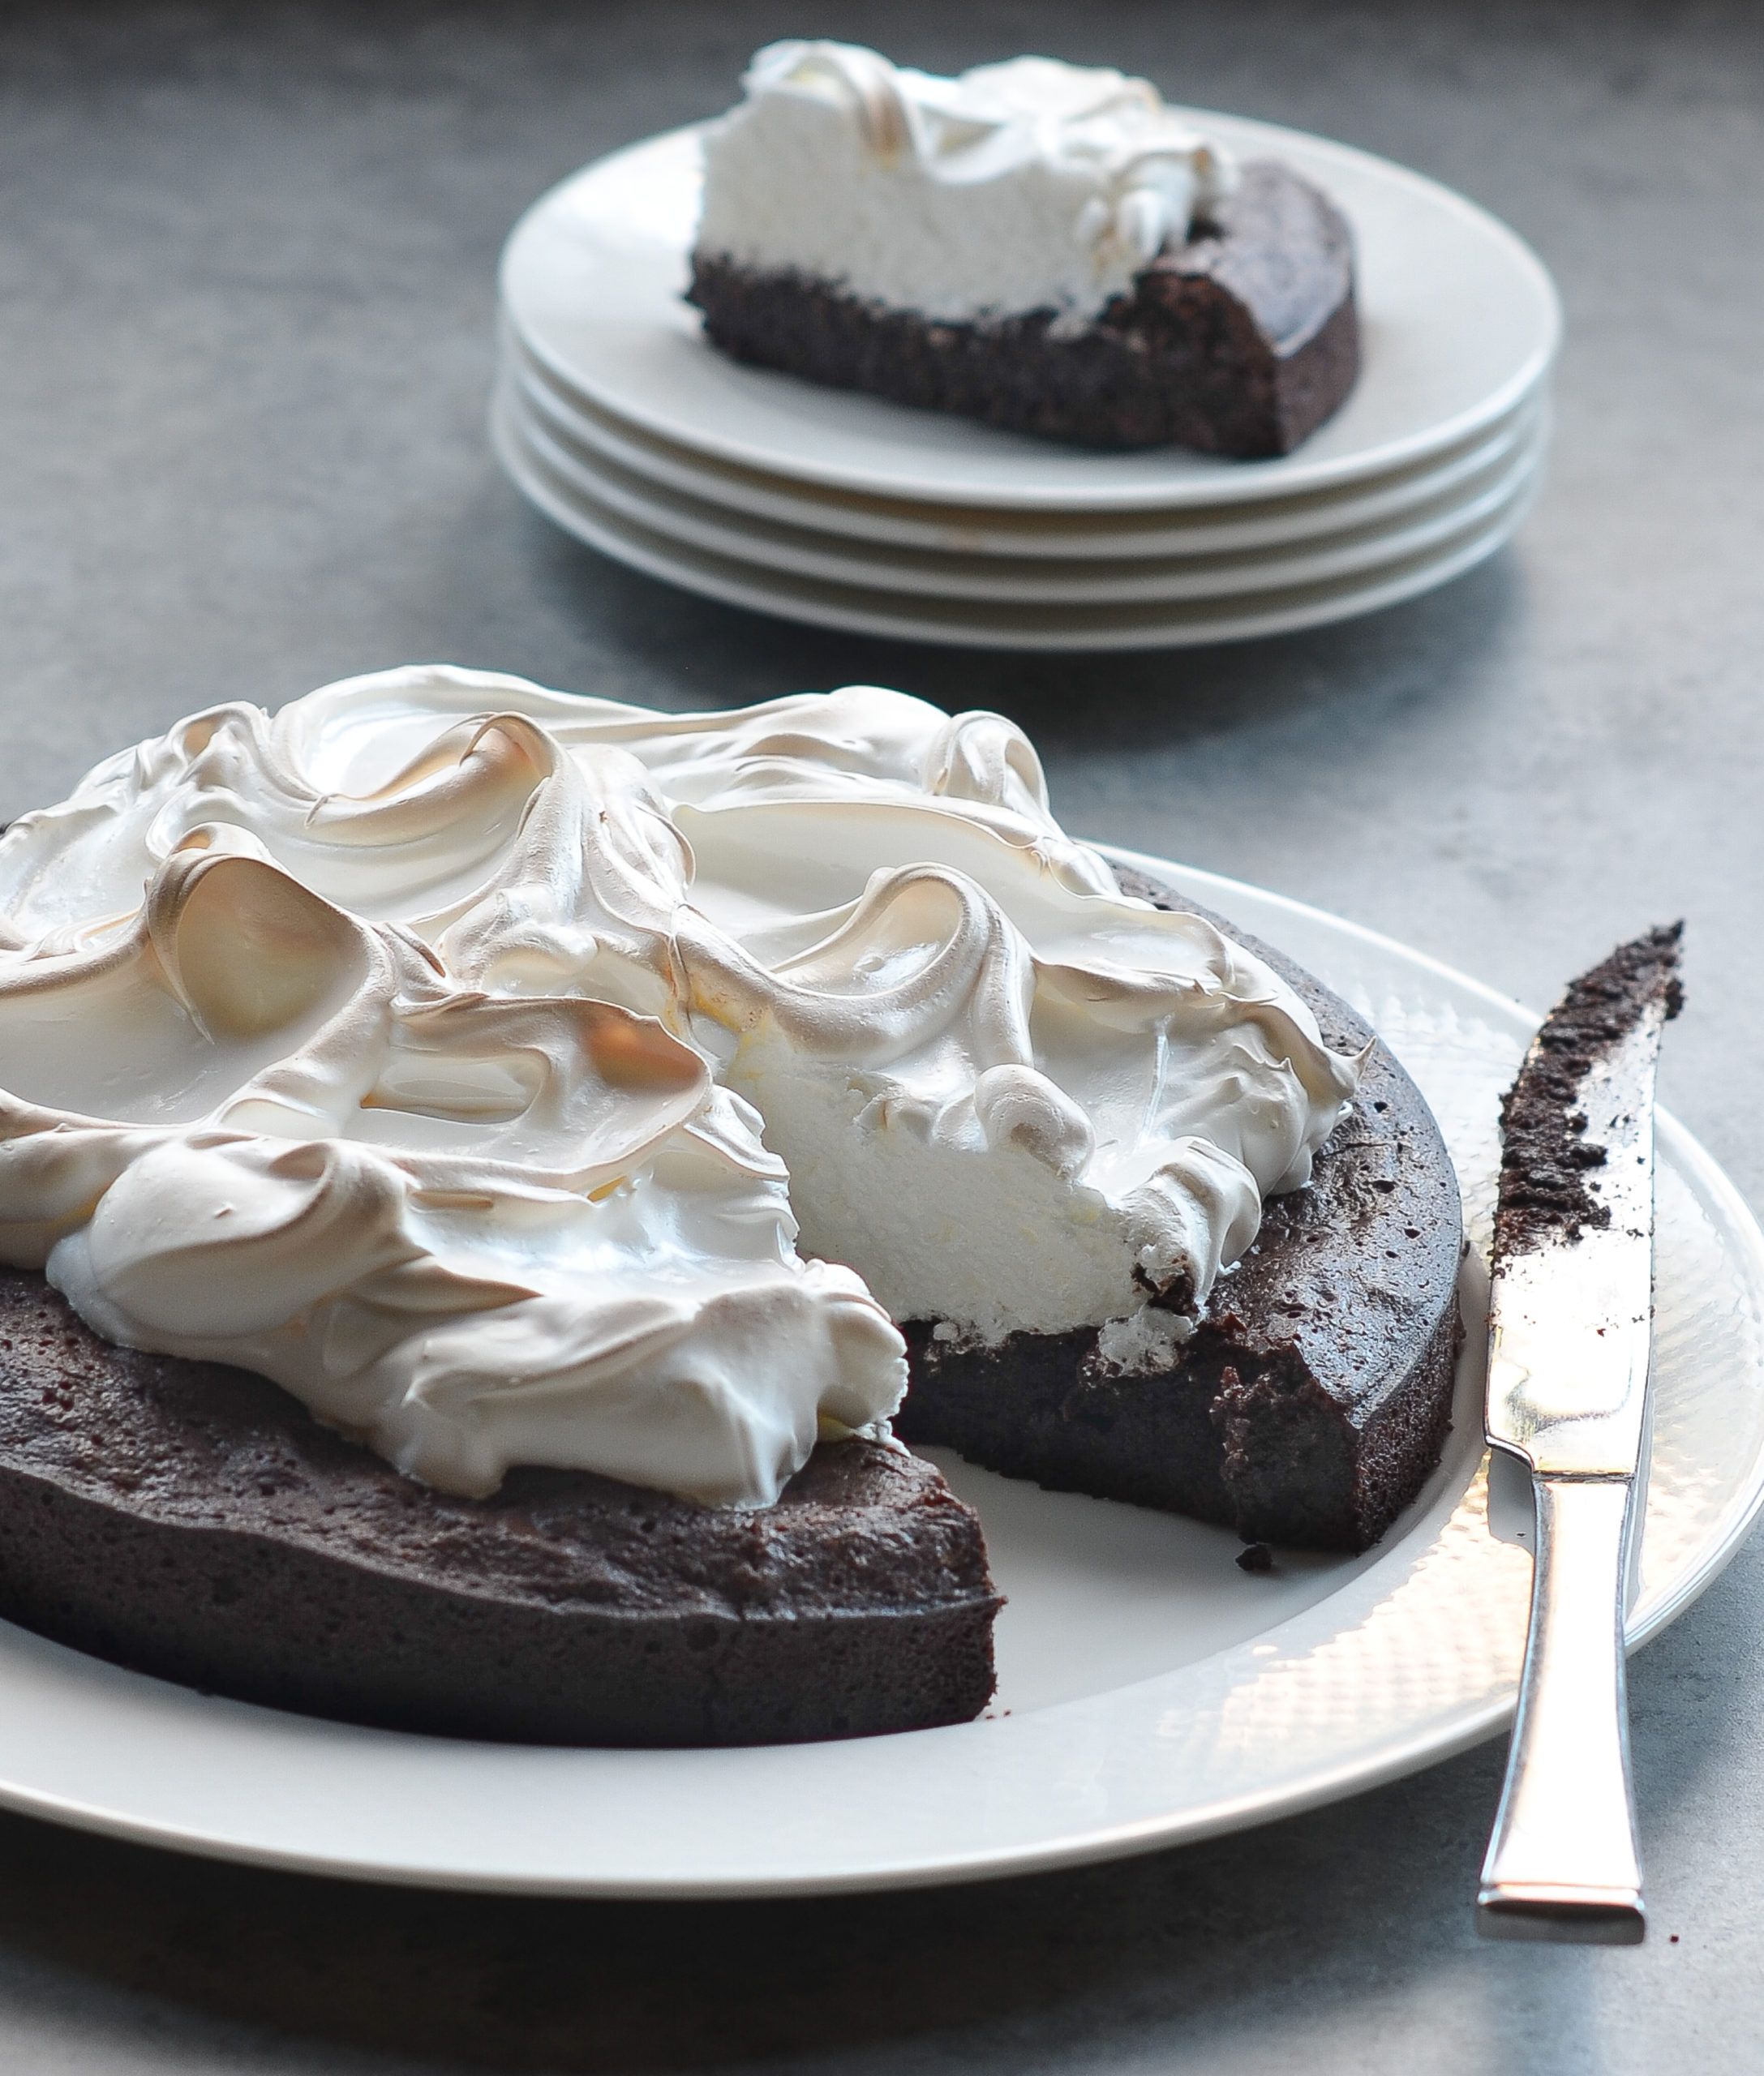 https://www.onceuponachef.com/images/2015/03/Flourless-Chocolate-Cake-with-Meringue-scaled.jpg